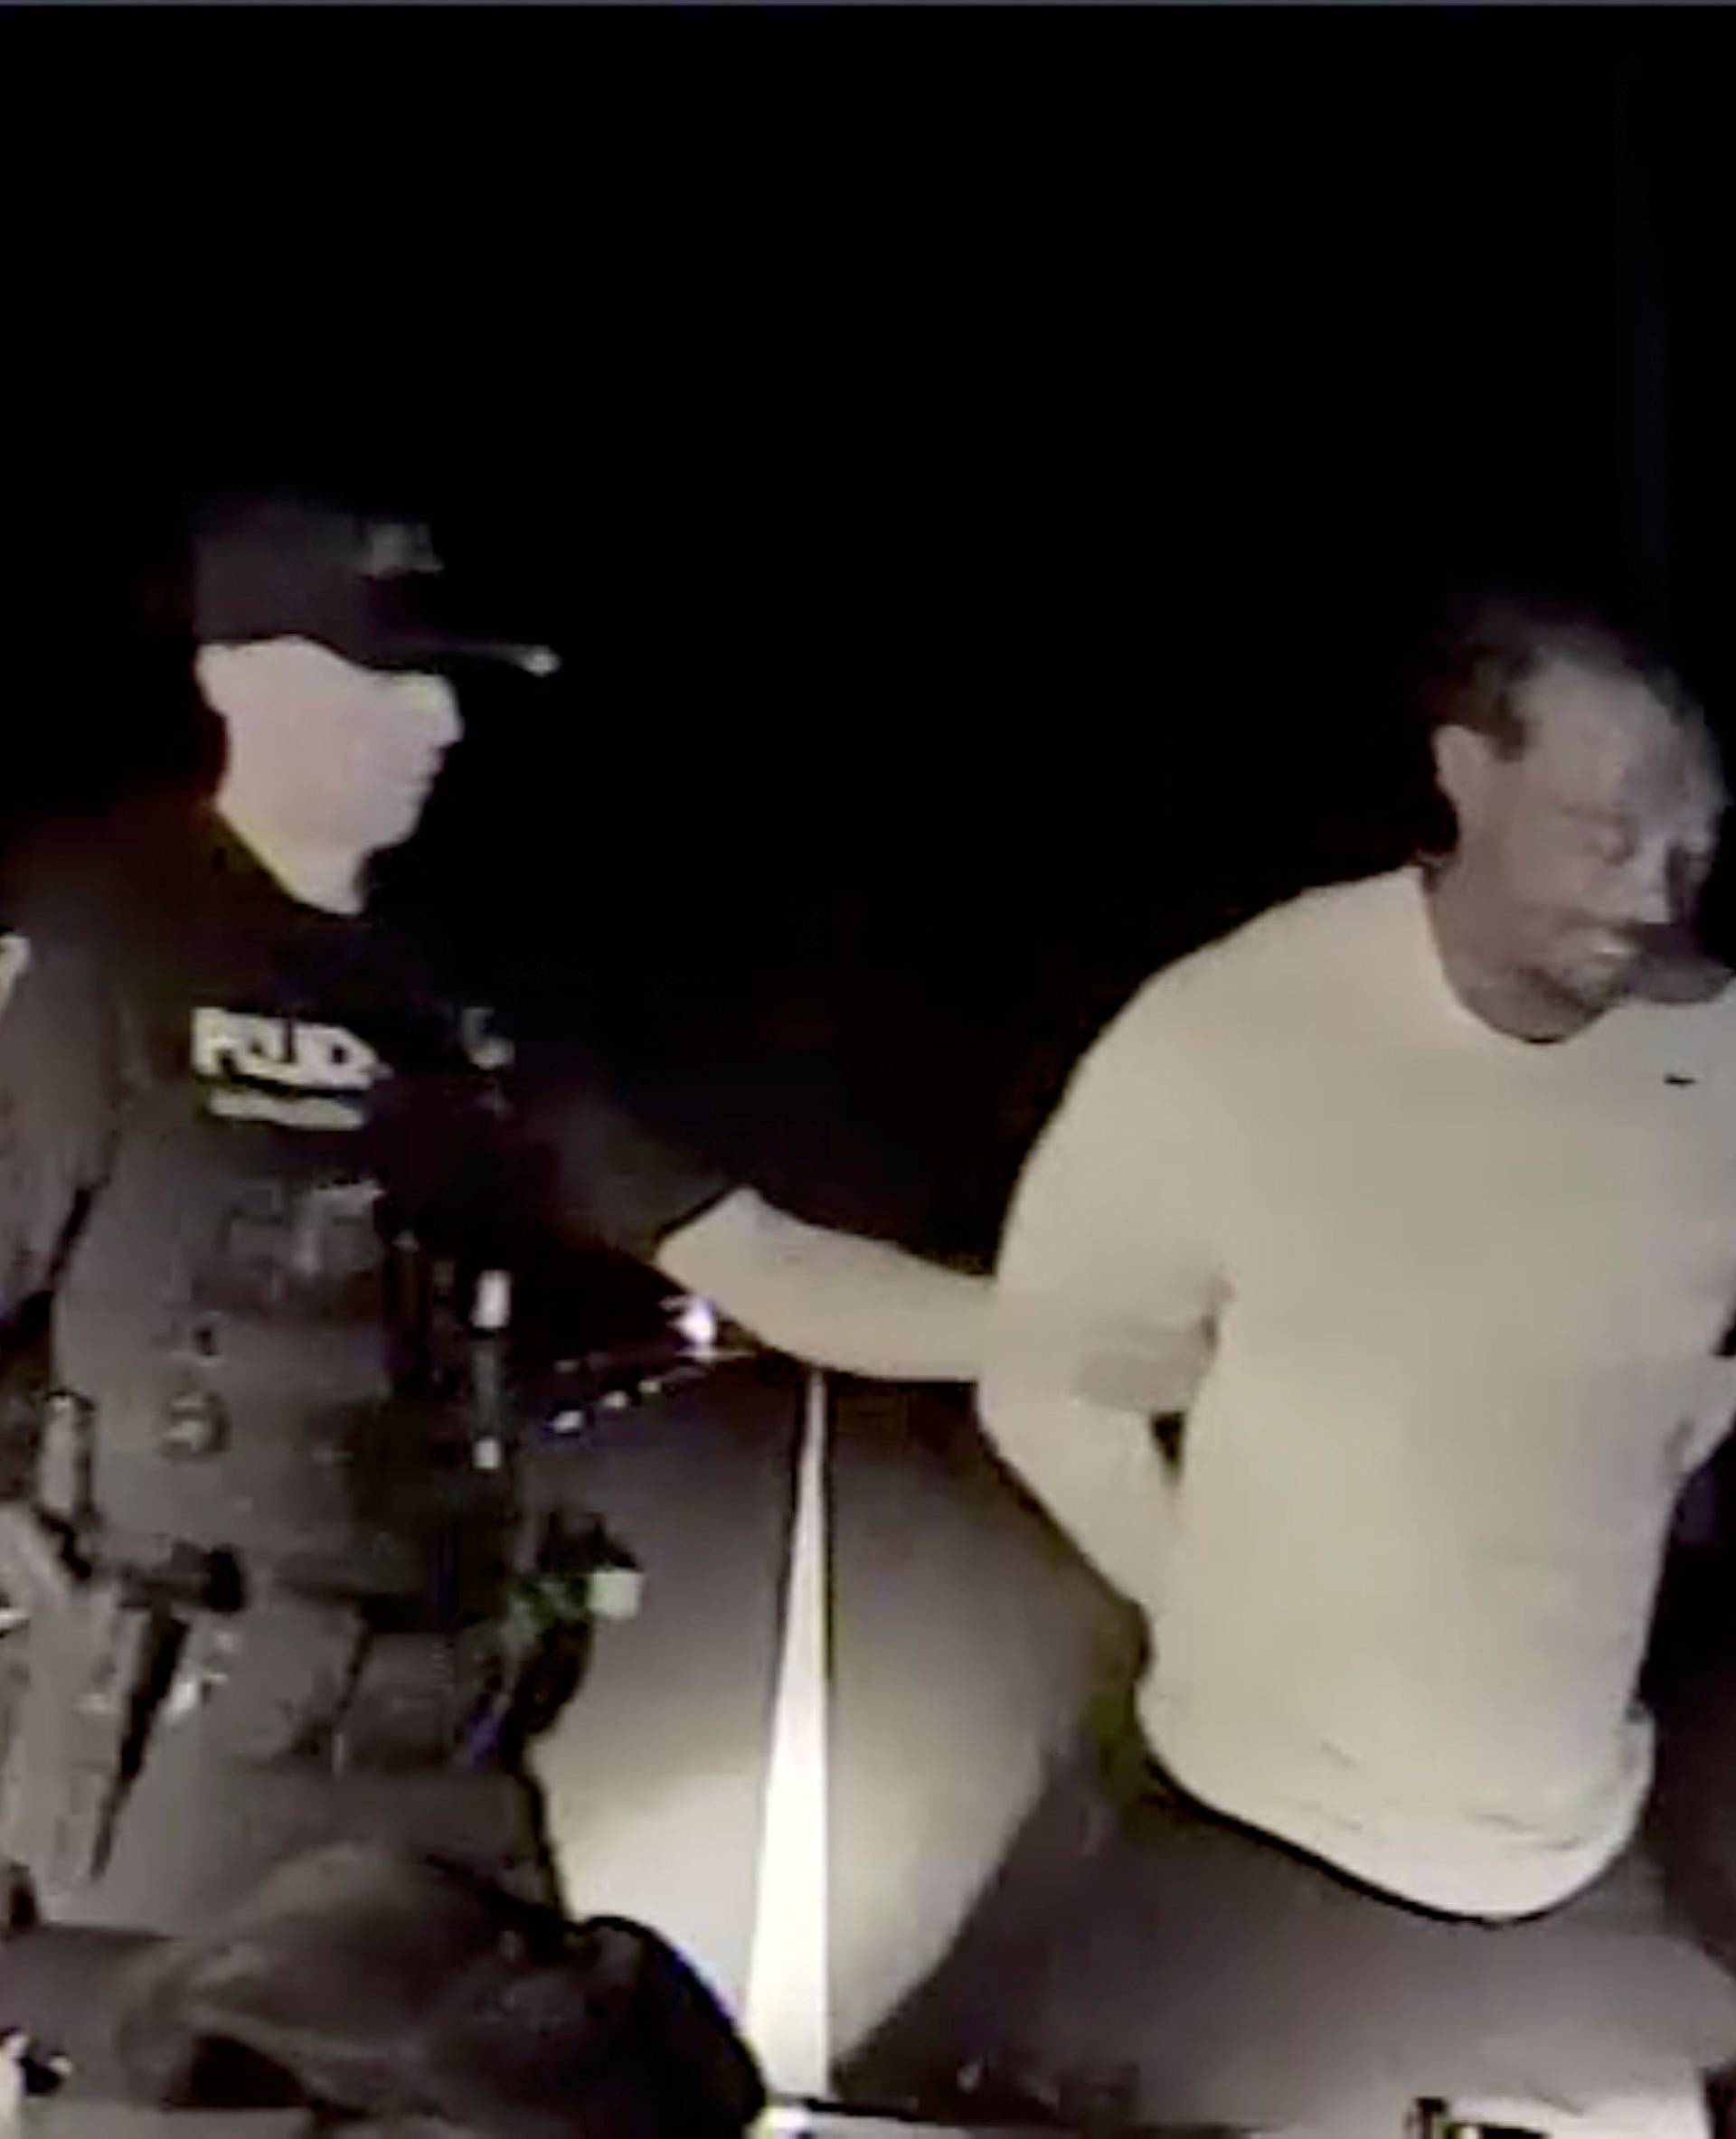 Tiger Woods is seen handcuffed and arrested by police officers in this still image from police dashcam video in Jupiter